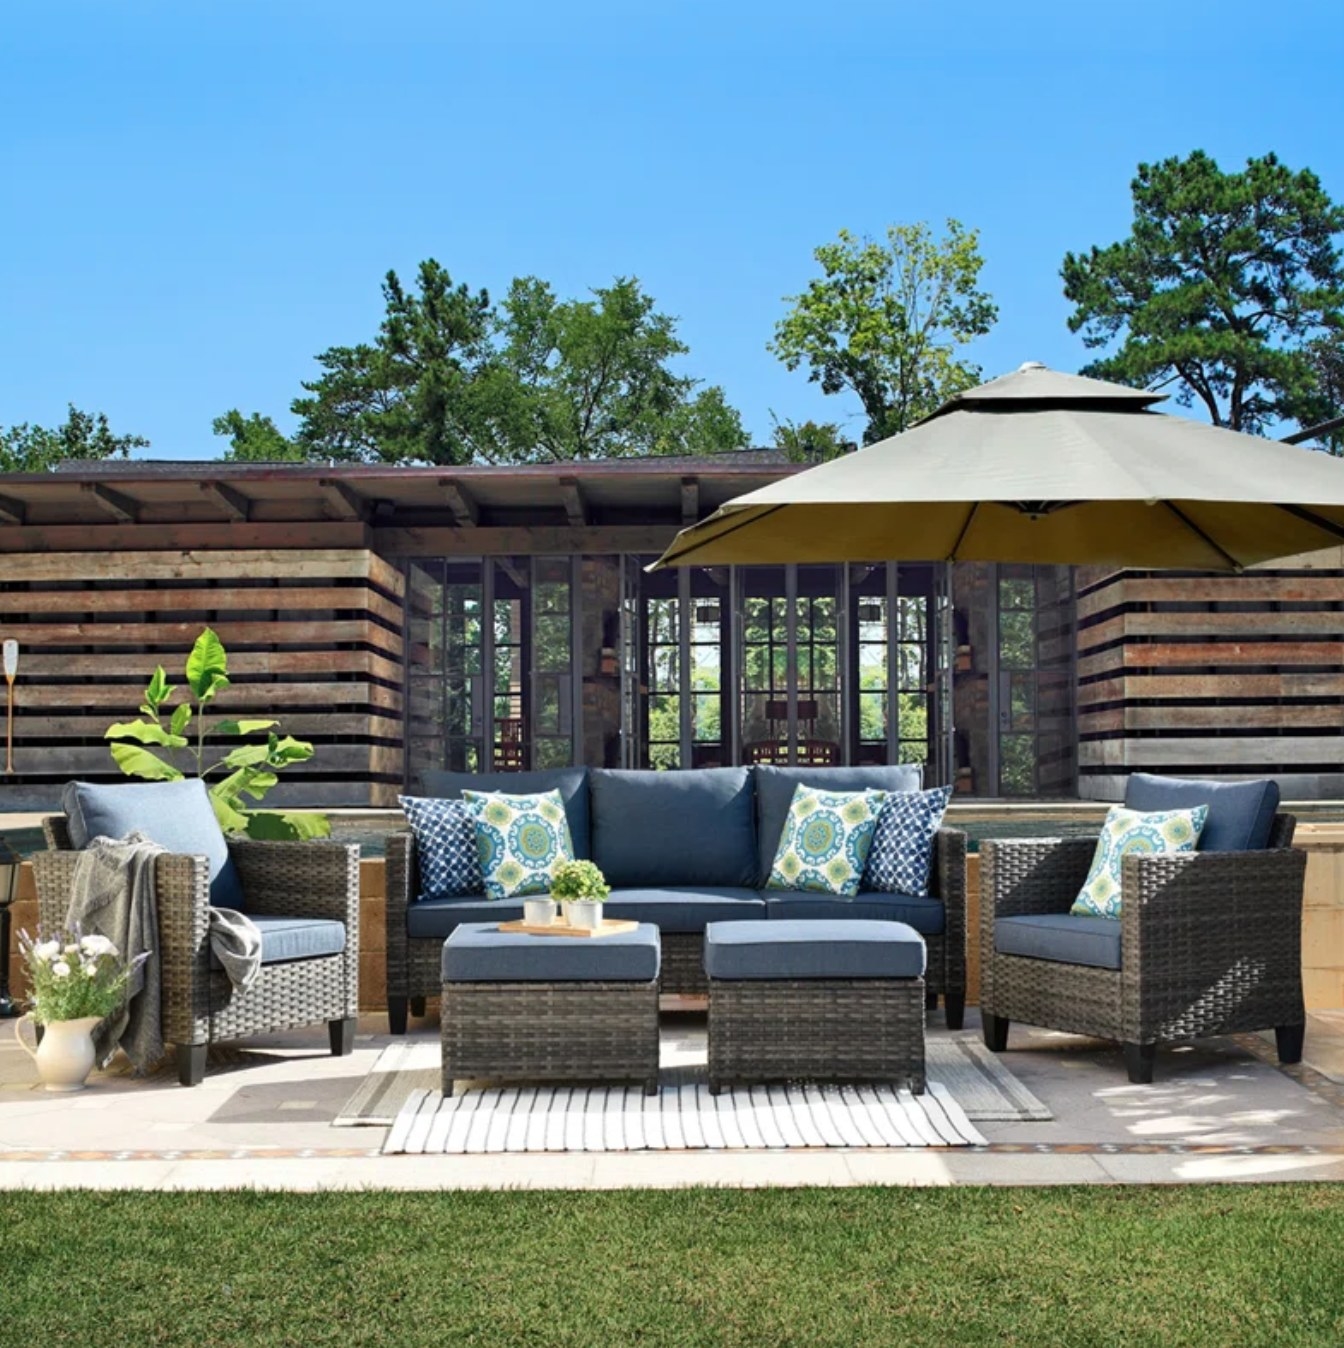 the navy and dark wicker set on a decorated patio space